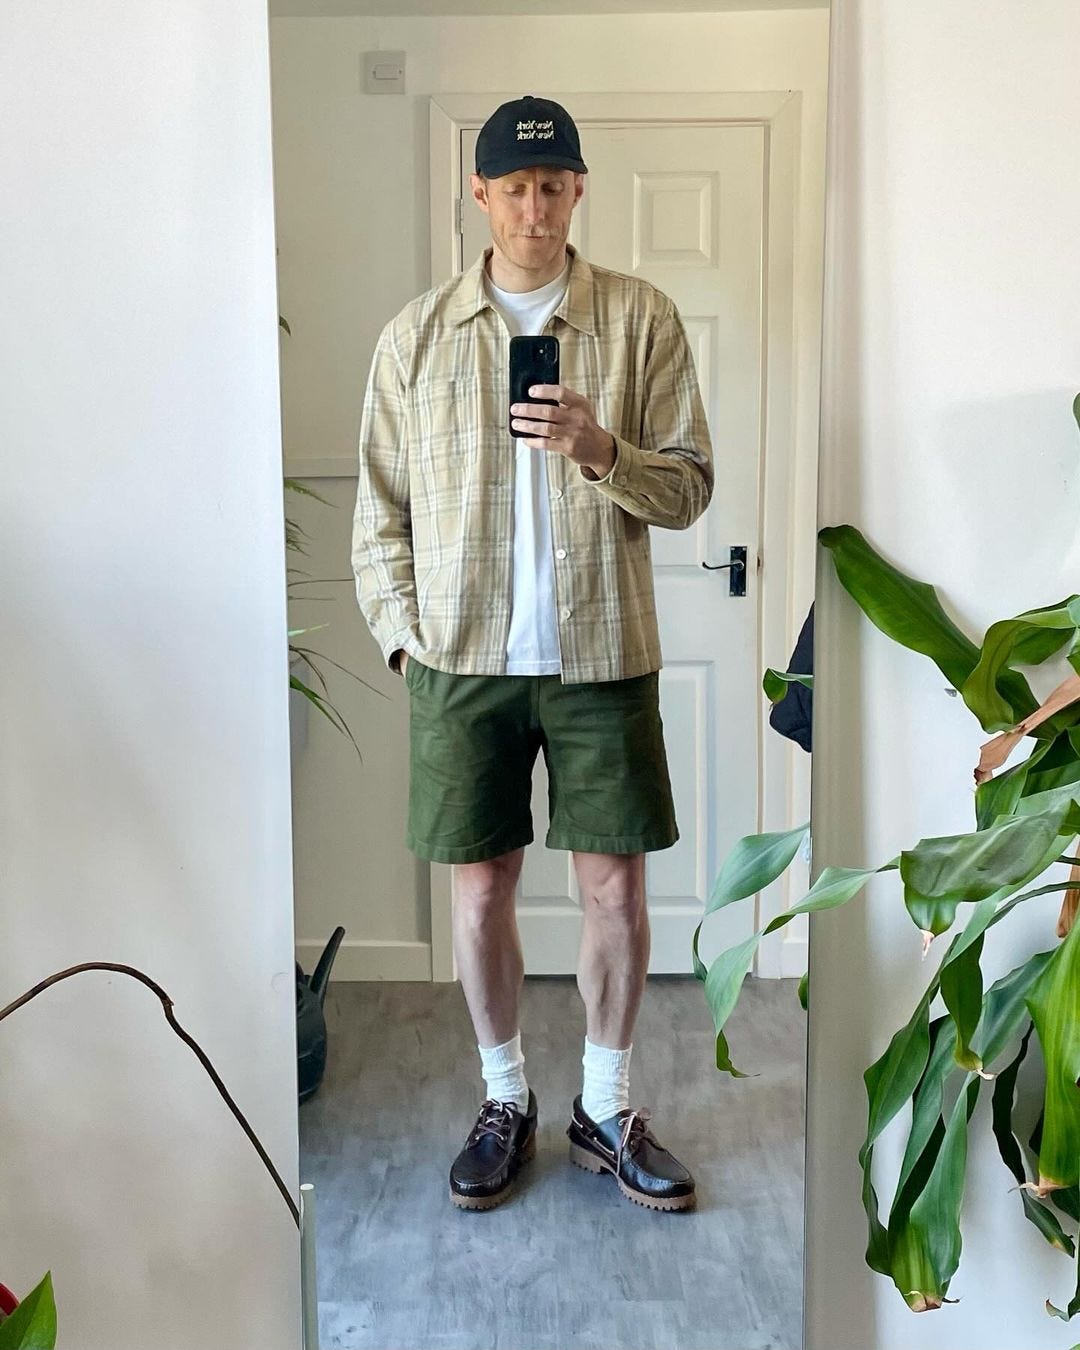 man taking a picture of himself in the mirror. he is wearing a long-sleeve tan shirt over a white t-shirt, green shorts, and boat shoes with tall white socks